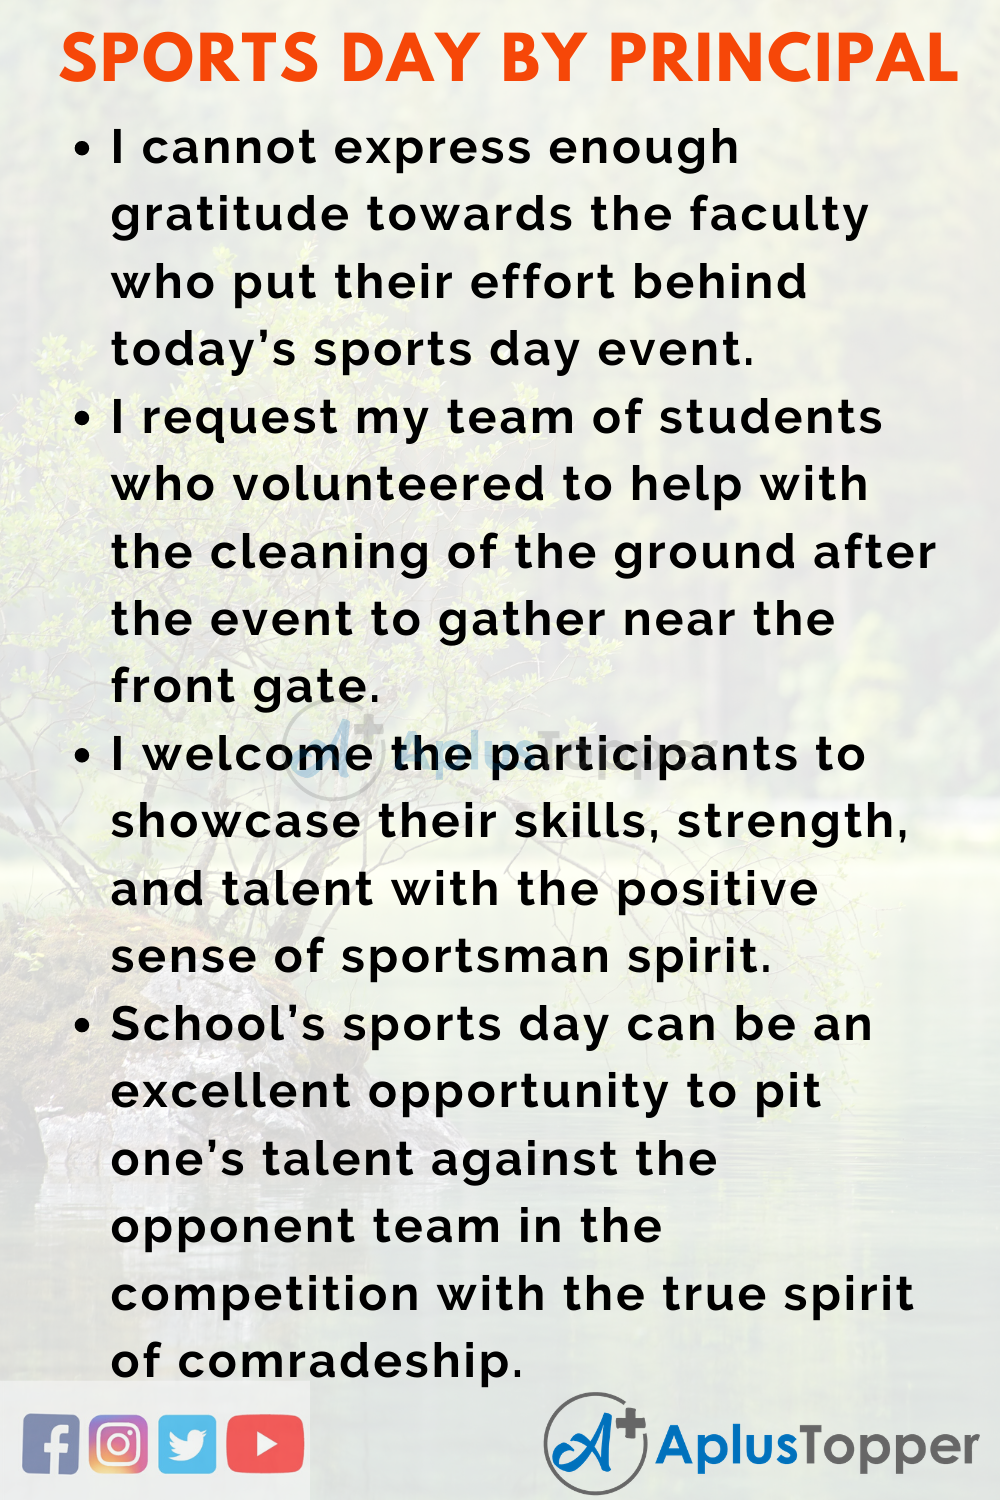 sample welcome speech for sports day at school